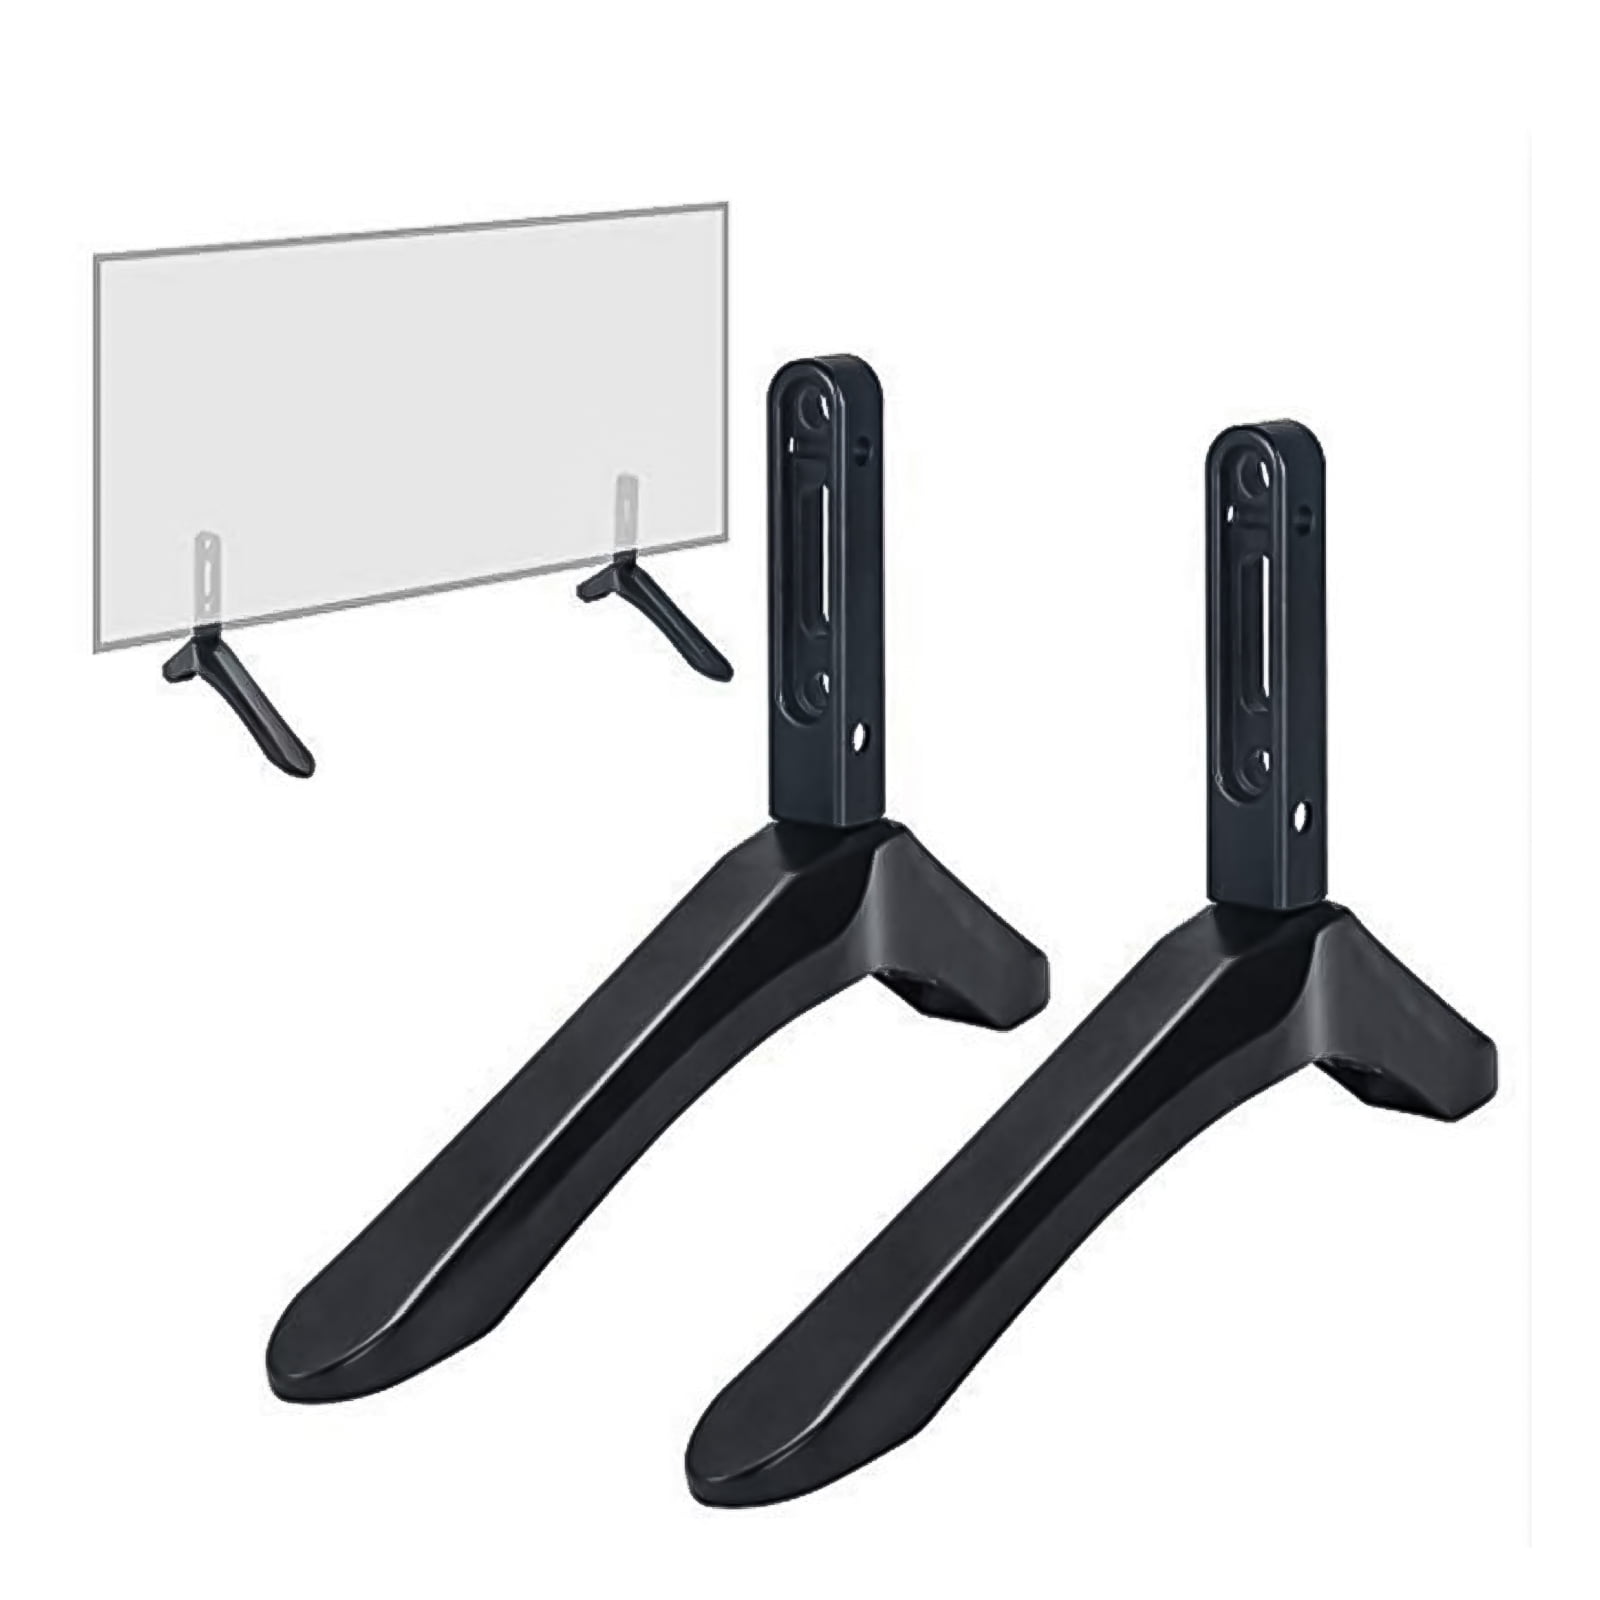 Universal Tabletop TV Stand For 32 to inch LCD LED TVs, Stuffygreenus TV Base Holds Up to 99lbs, Punch-Free Walmart.com